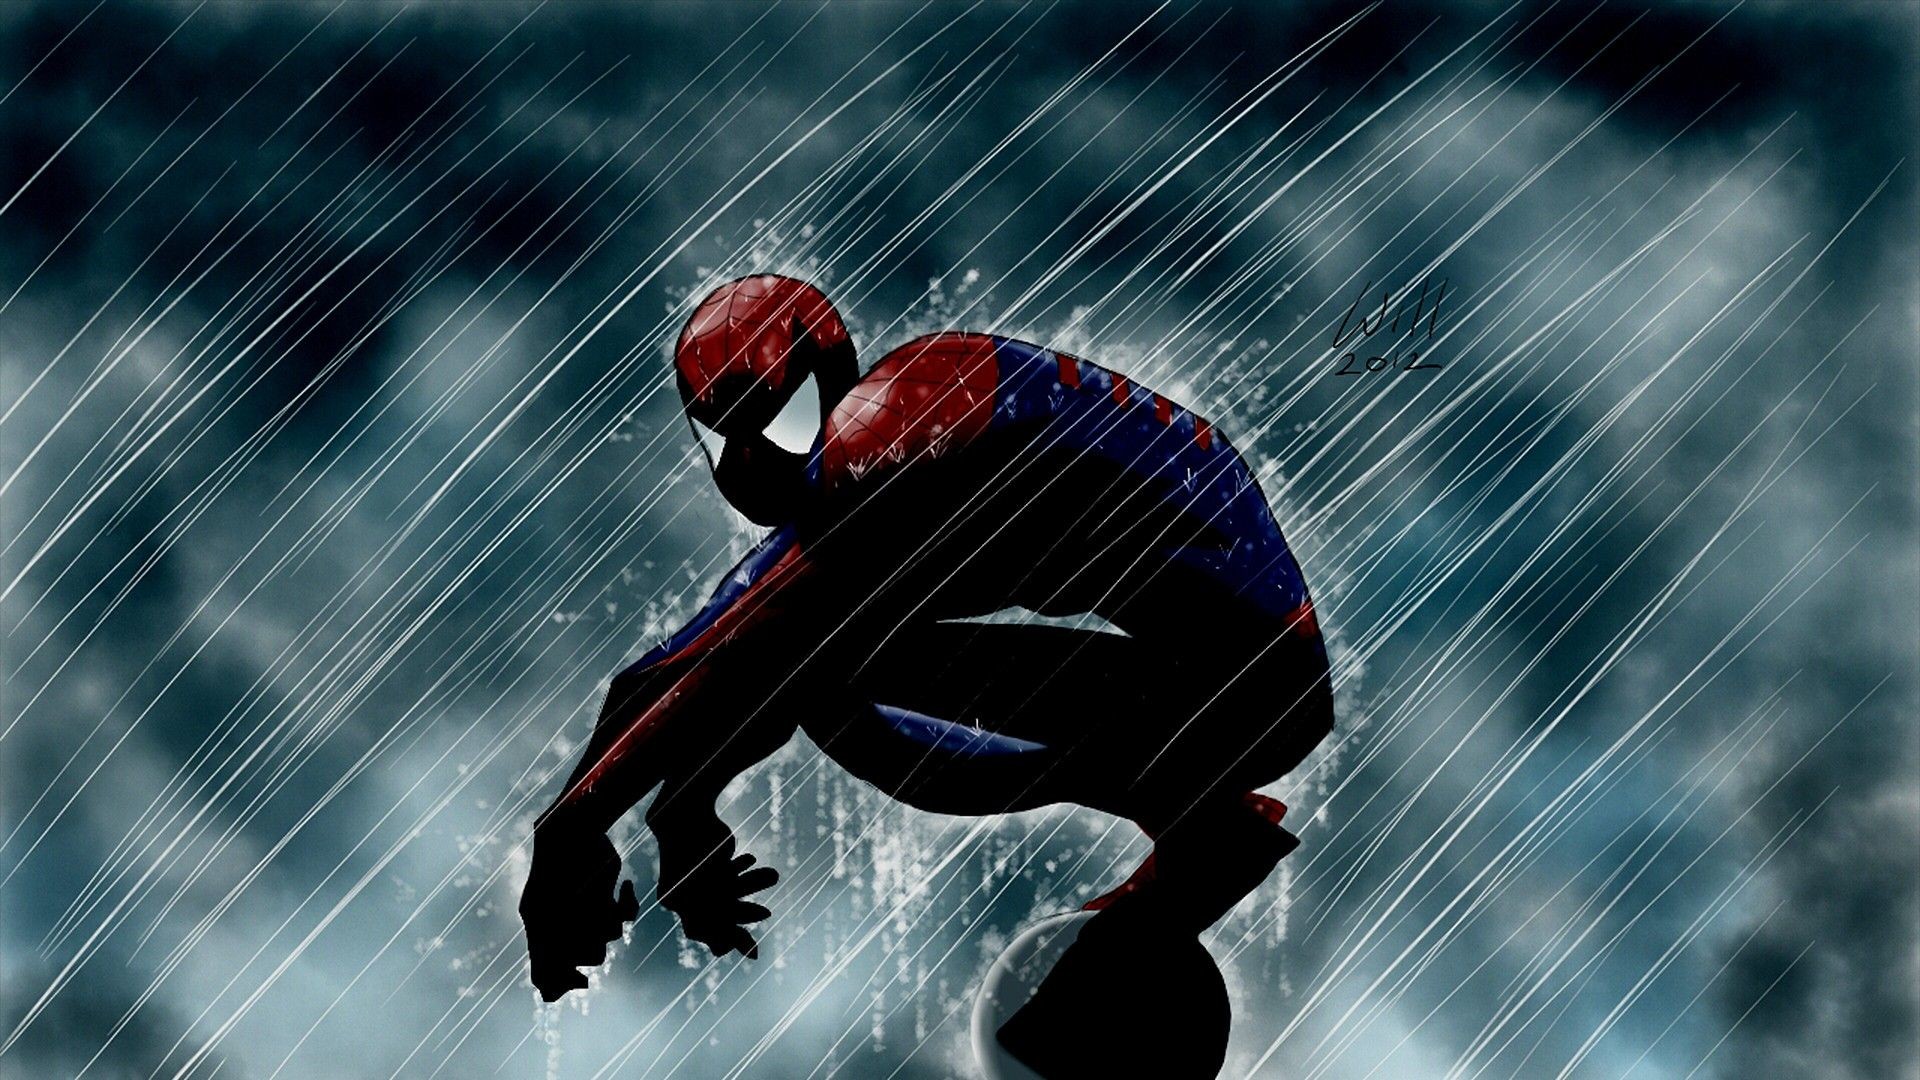 1920x1080 Spiderman in Comic Exclusive HD Wallpapers 6284 